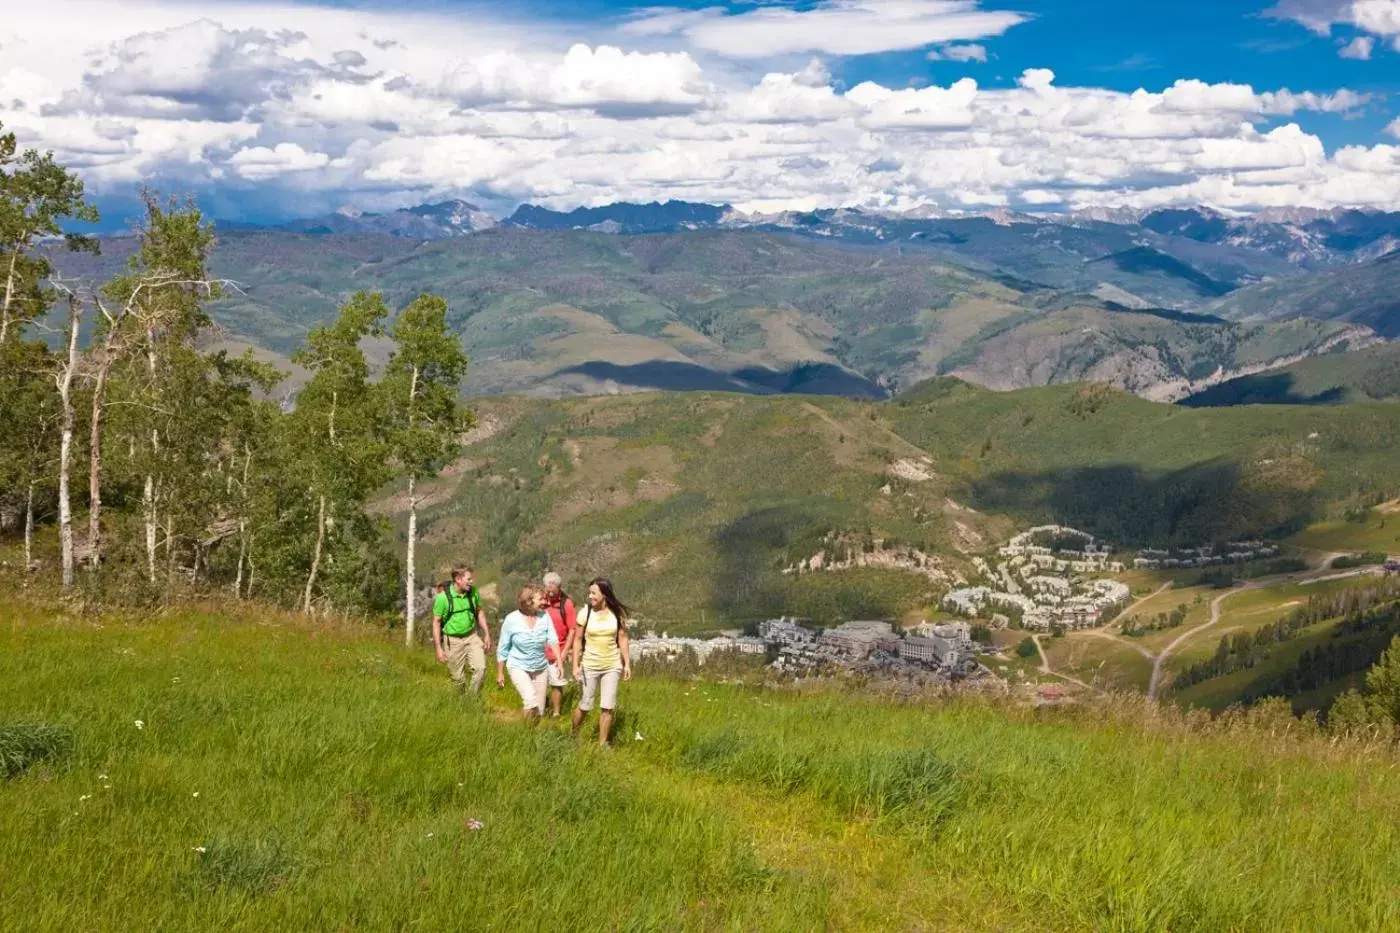 Hiking in The Christie Lodge – All Suite Property Vail Valley/Beaver Creek